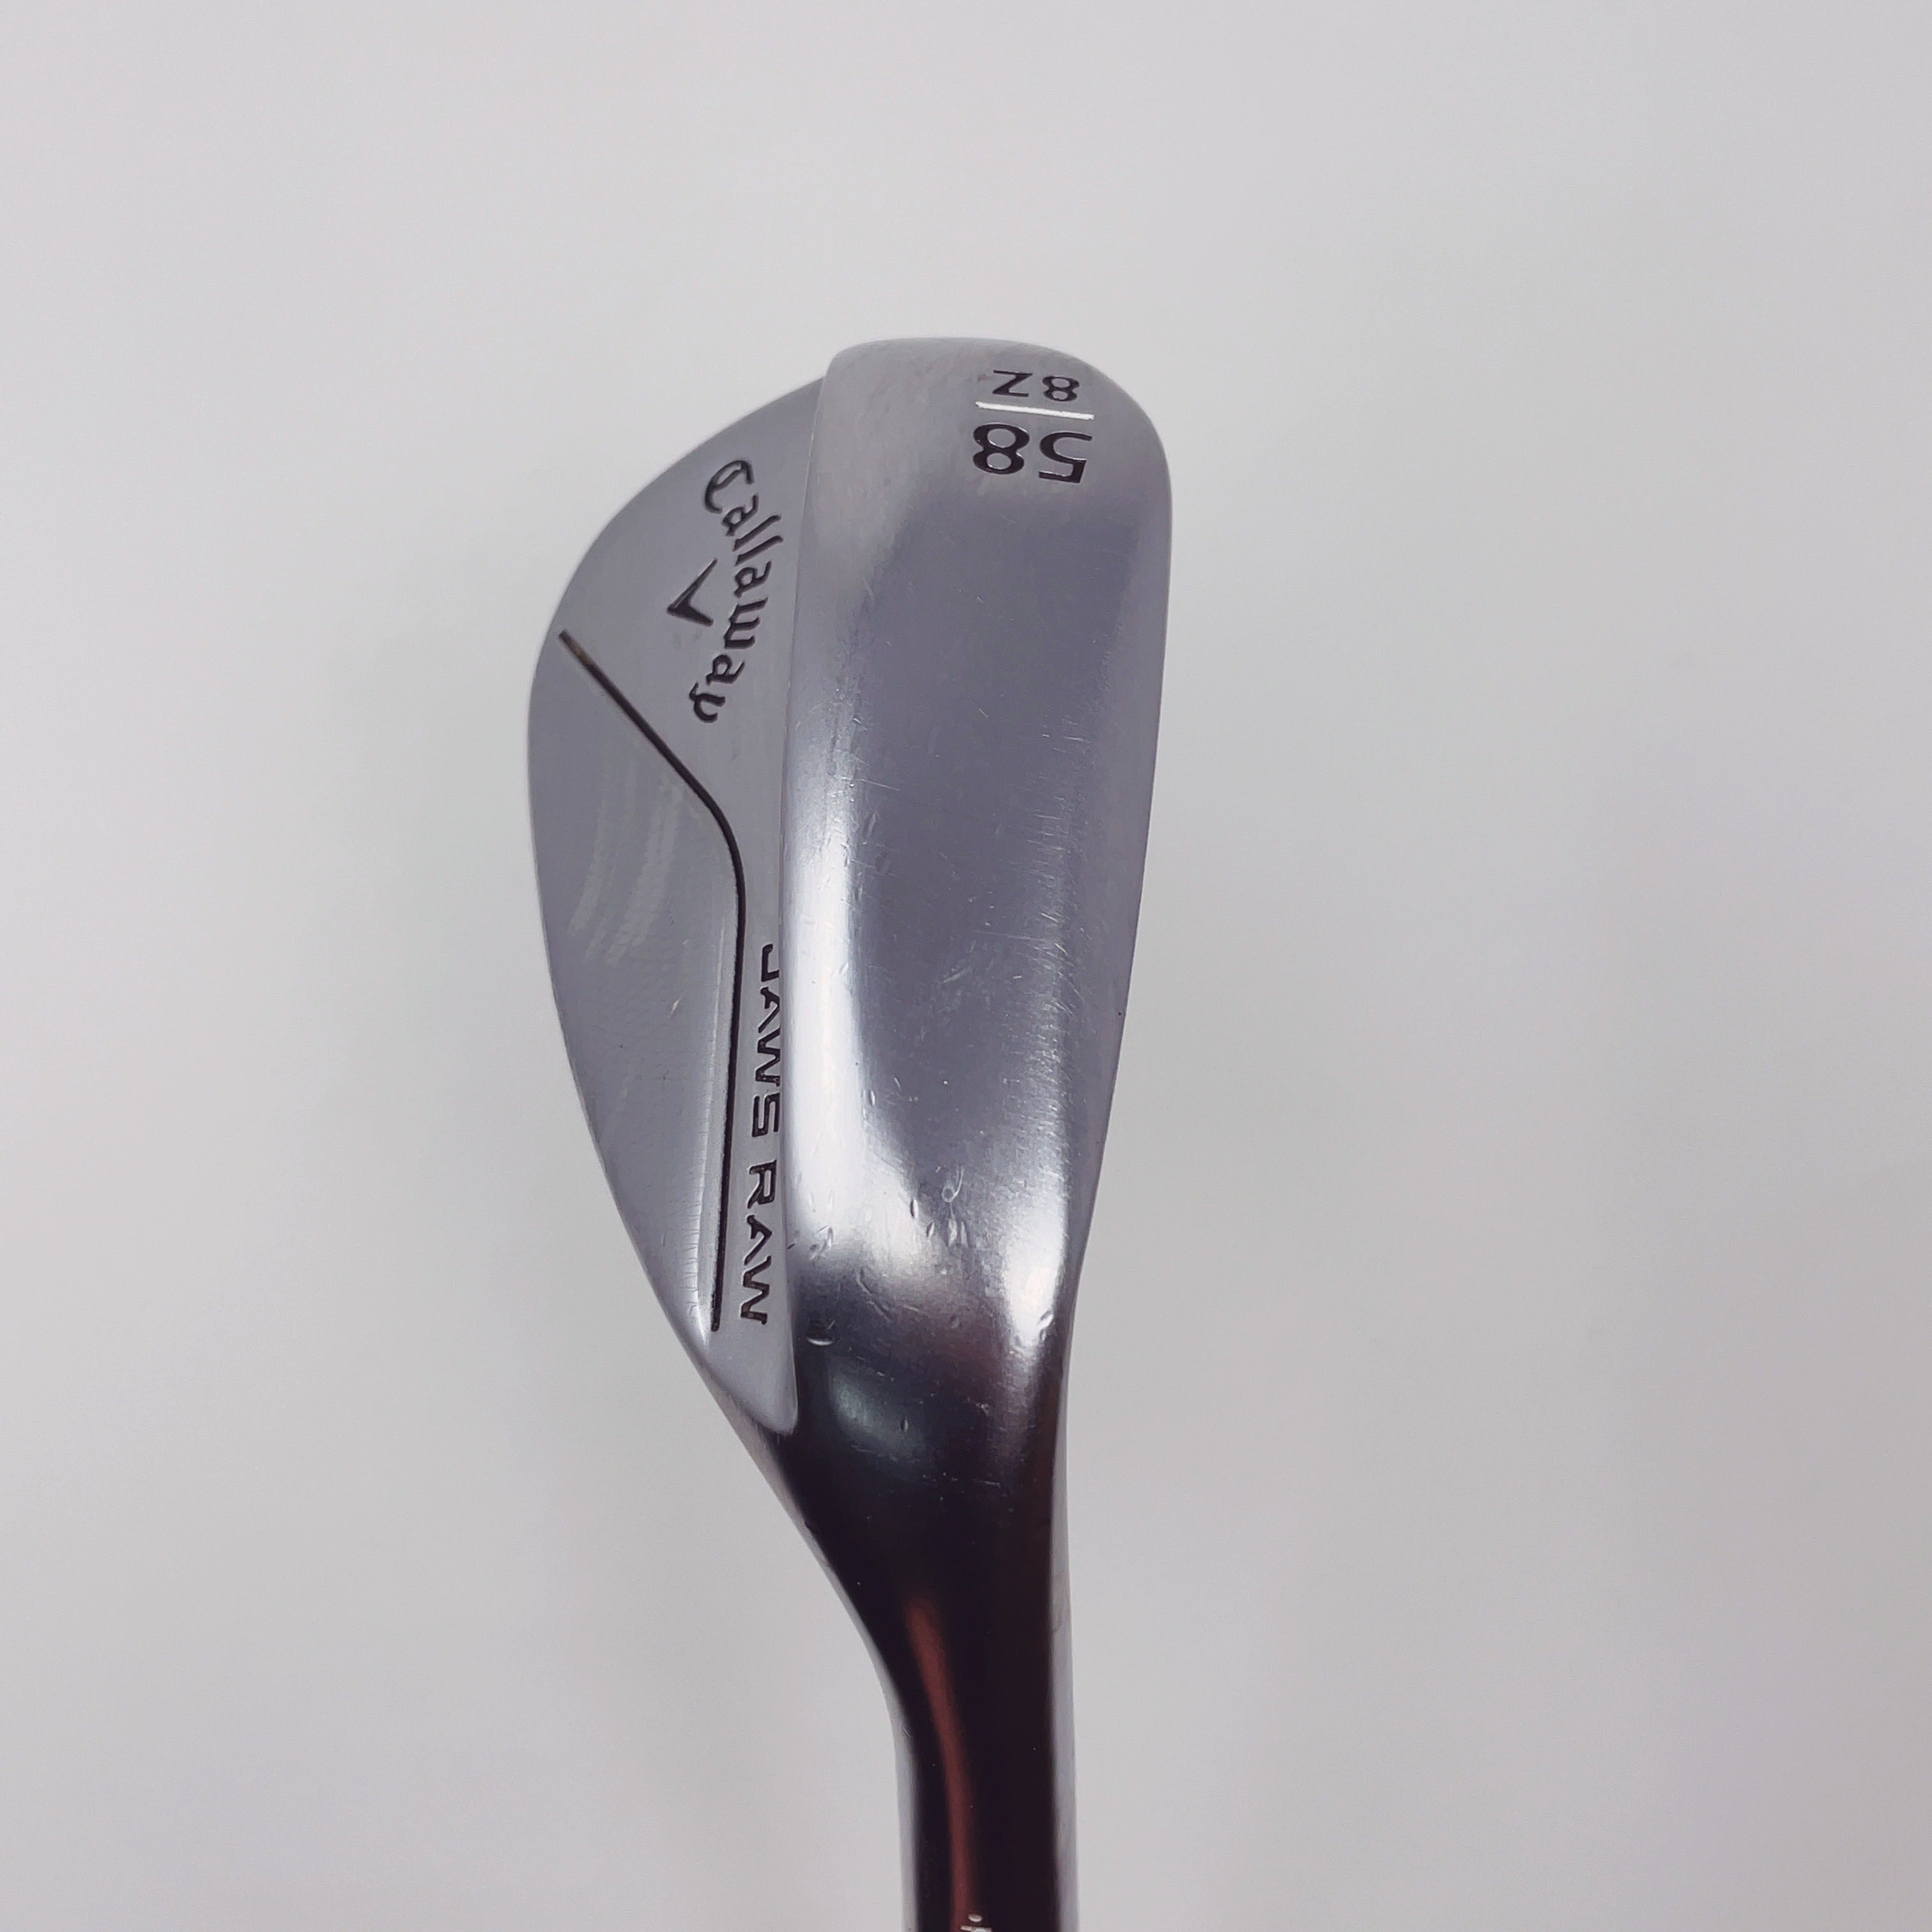 CALLAWAY JAWS RAW WEDGE  TOUR ISSUE  / 58-8 Z GRIND / DYNAMIC GOLD 105 S300